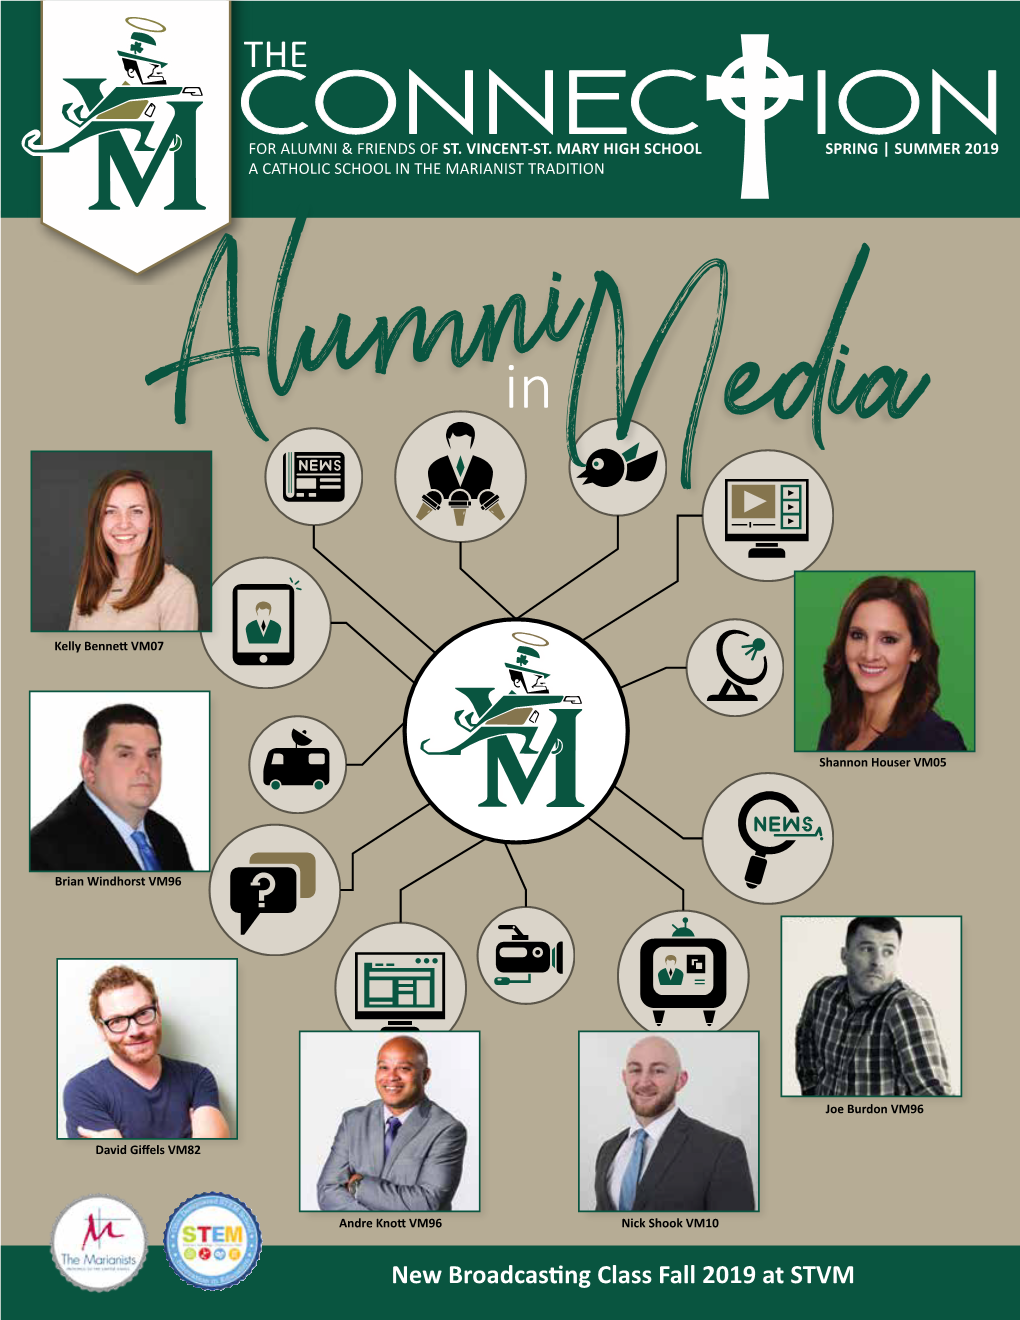 New Broadcasting Class Fall 2019 at STVM ST